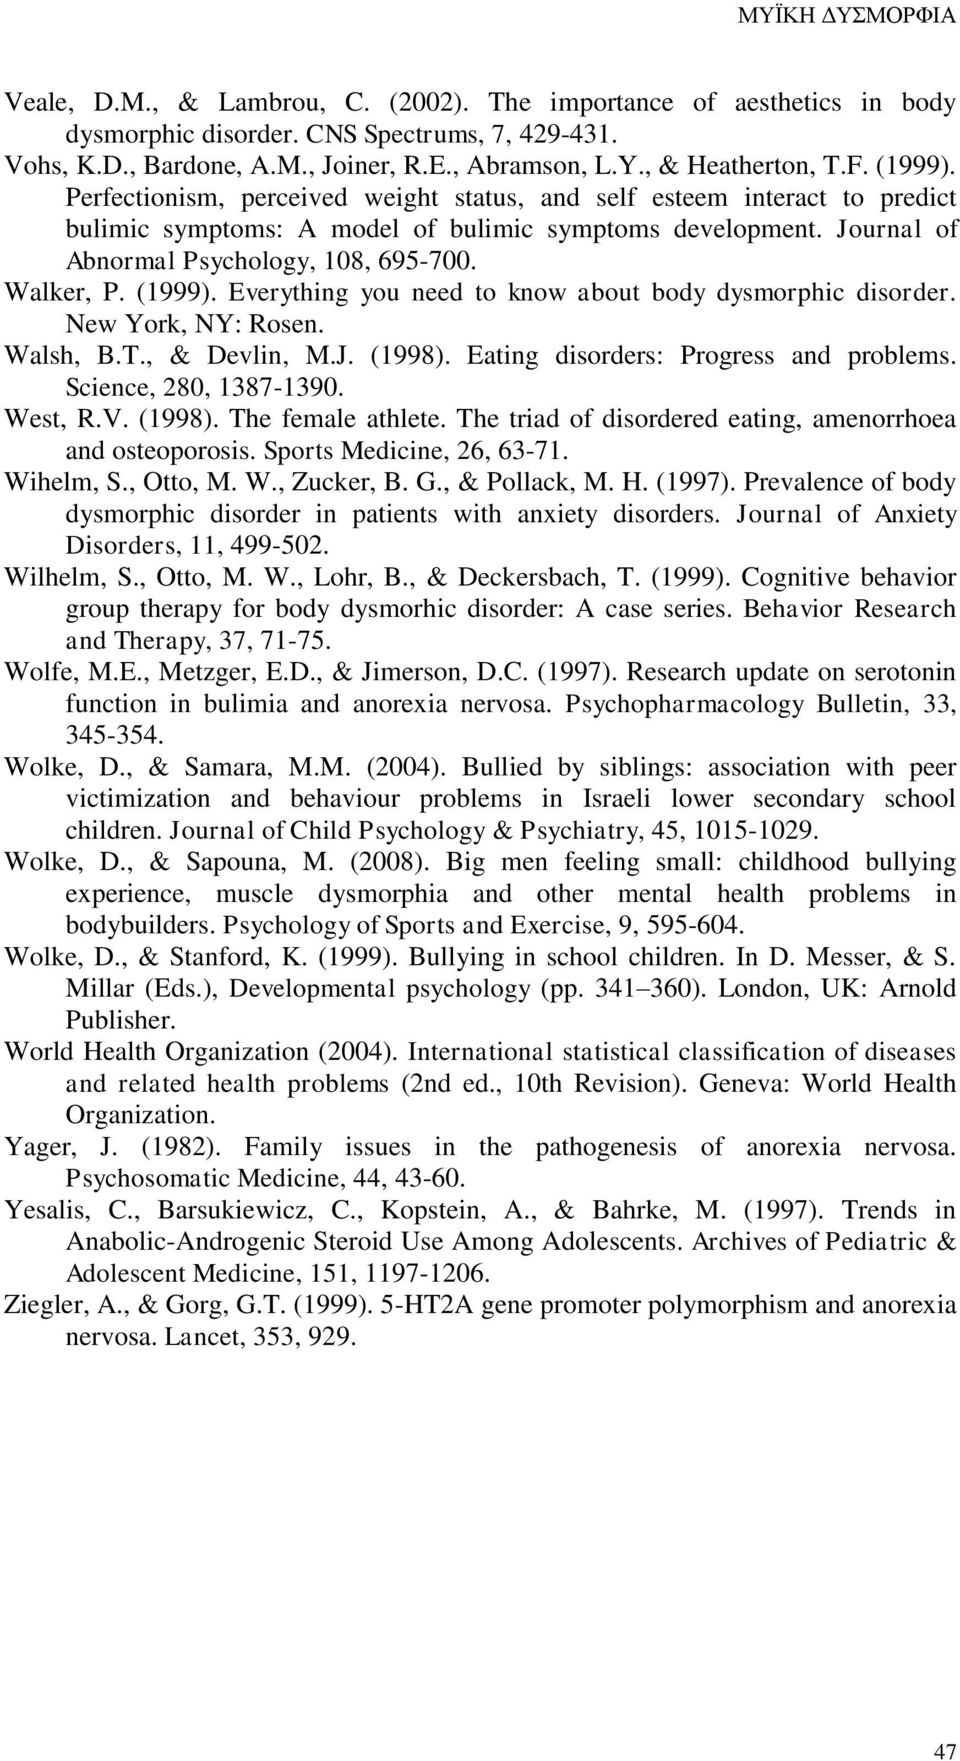 Journal of Abnormal Psychology, 108, 695-700. Walker, P. (1999). Everything you need to know about body dysmorphic disorder. New York, NY: Rosen. Walsh, B.T., & Devlin, M.J. (1998).